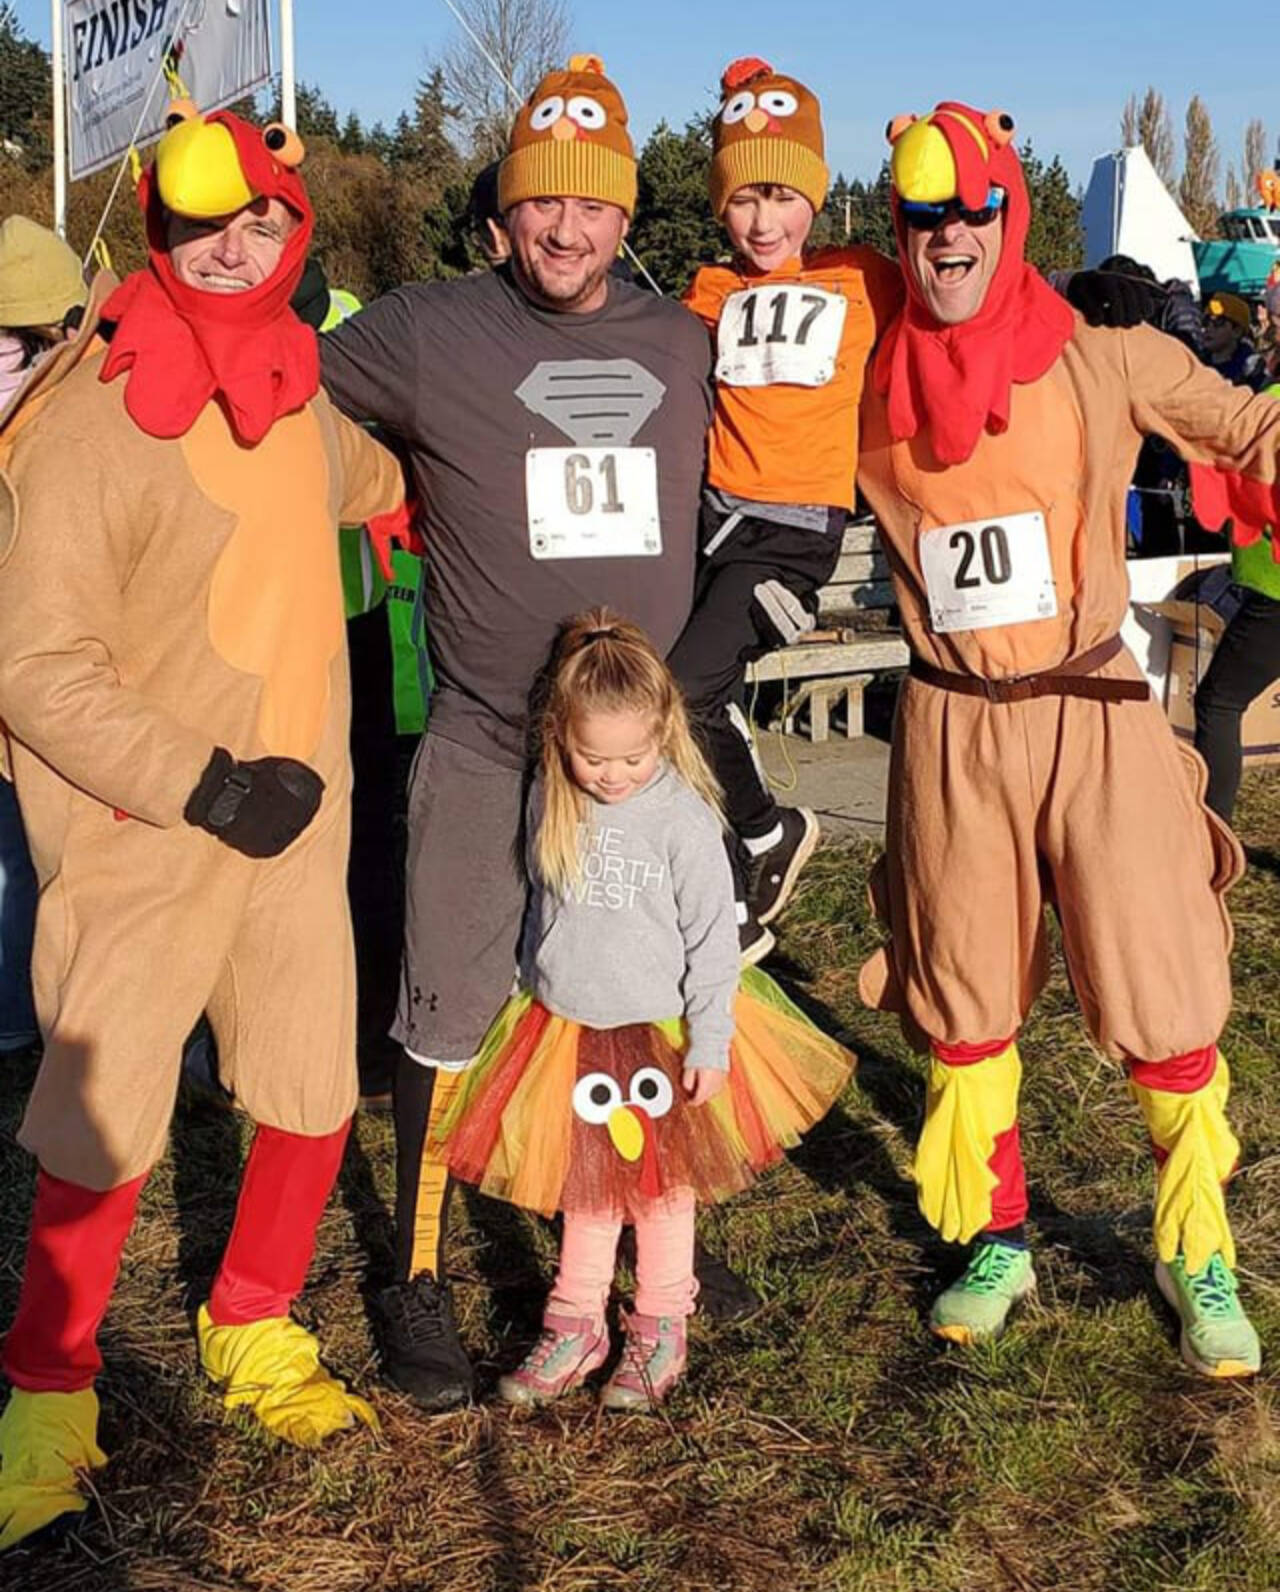 Participants in last week’s Jumping Mouse 5K turkey trot last weekend enjoyed a good time in Port Townsend. The race was won by Sebastian Manza, an East Jefferson high school runner. (Courtesy photo)